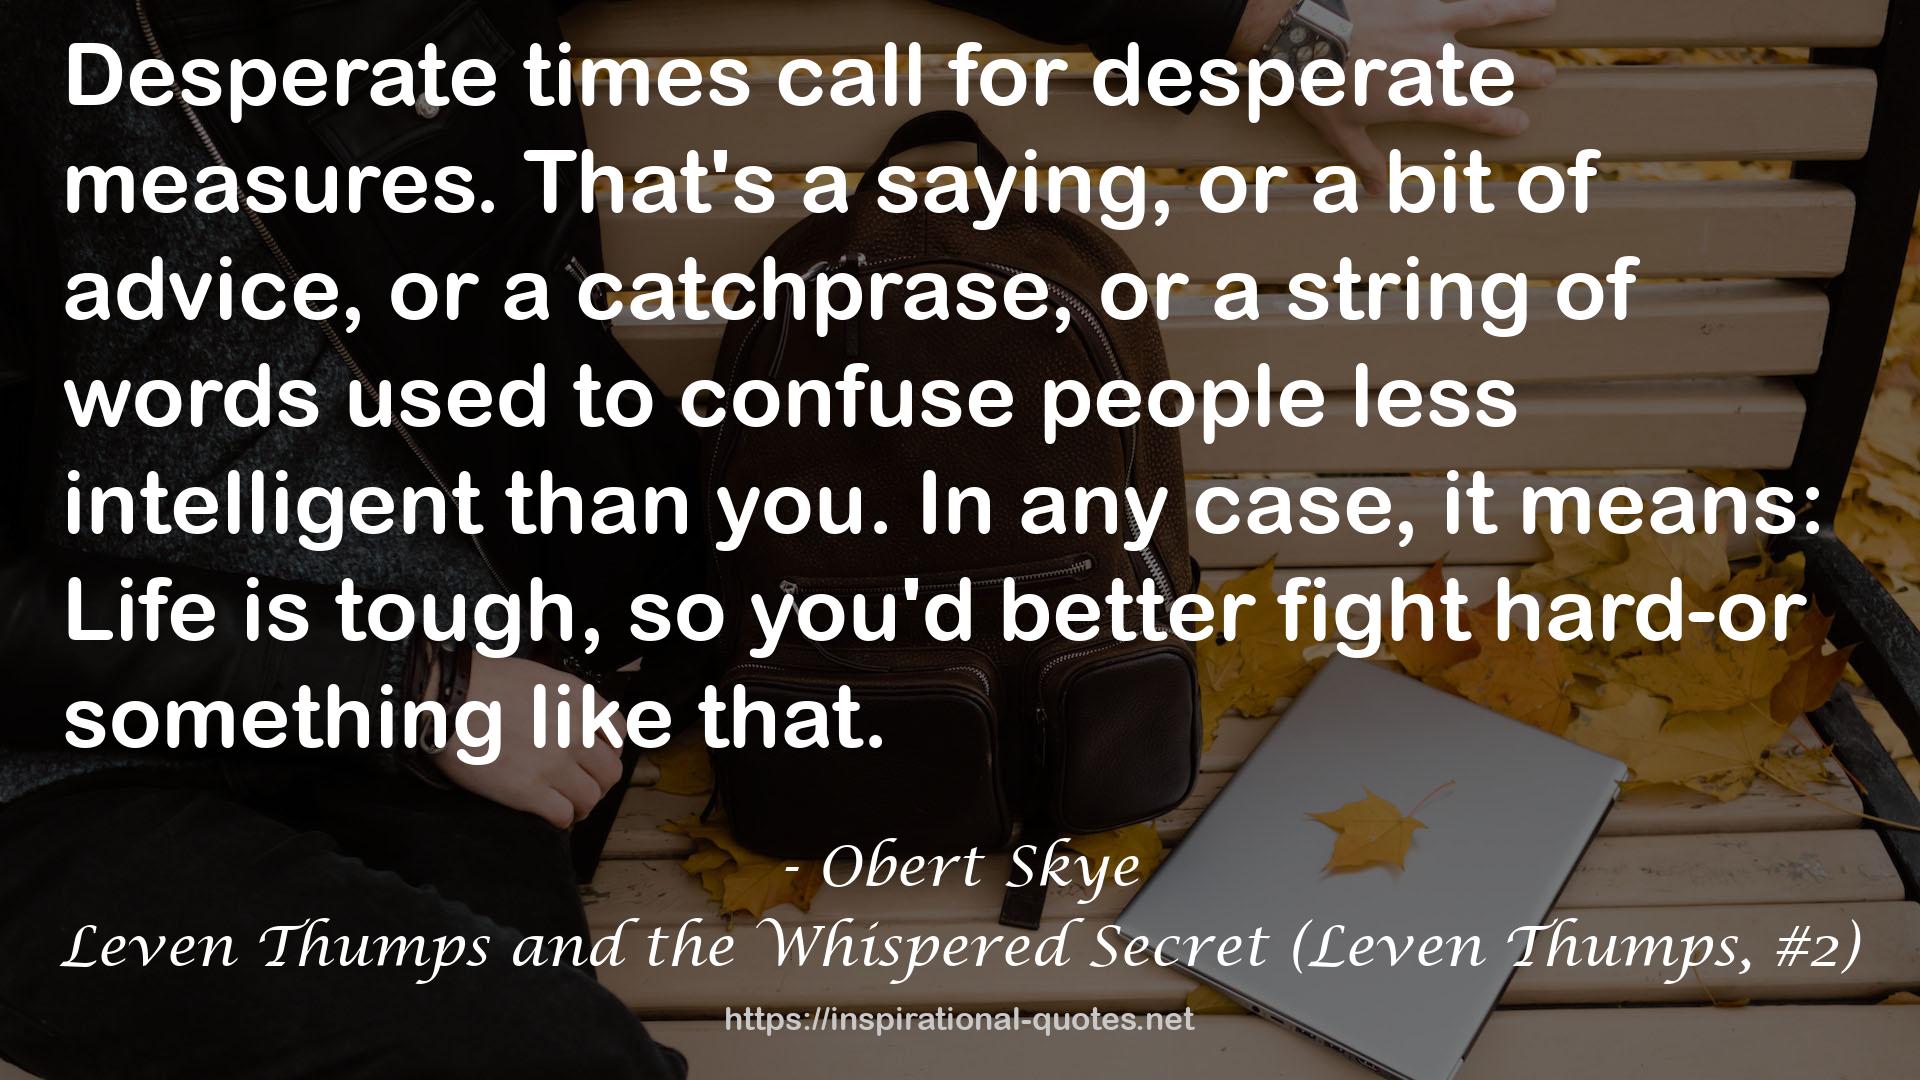 Leven Thumps and the Whispered Secret (Leven Thumps, #2) QUOTES